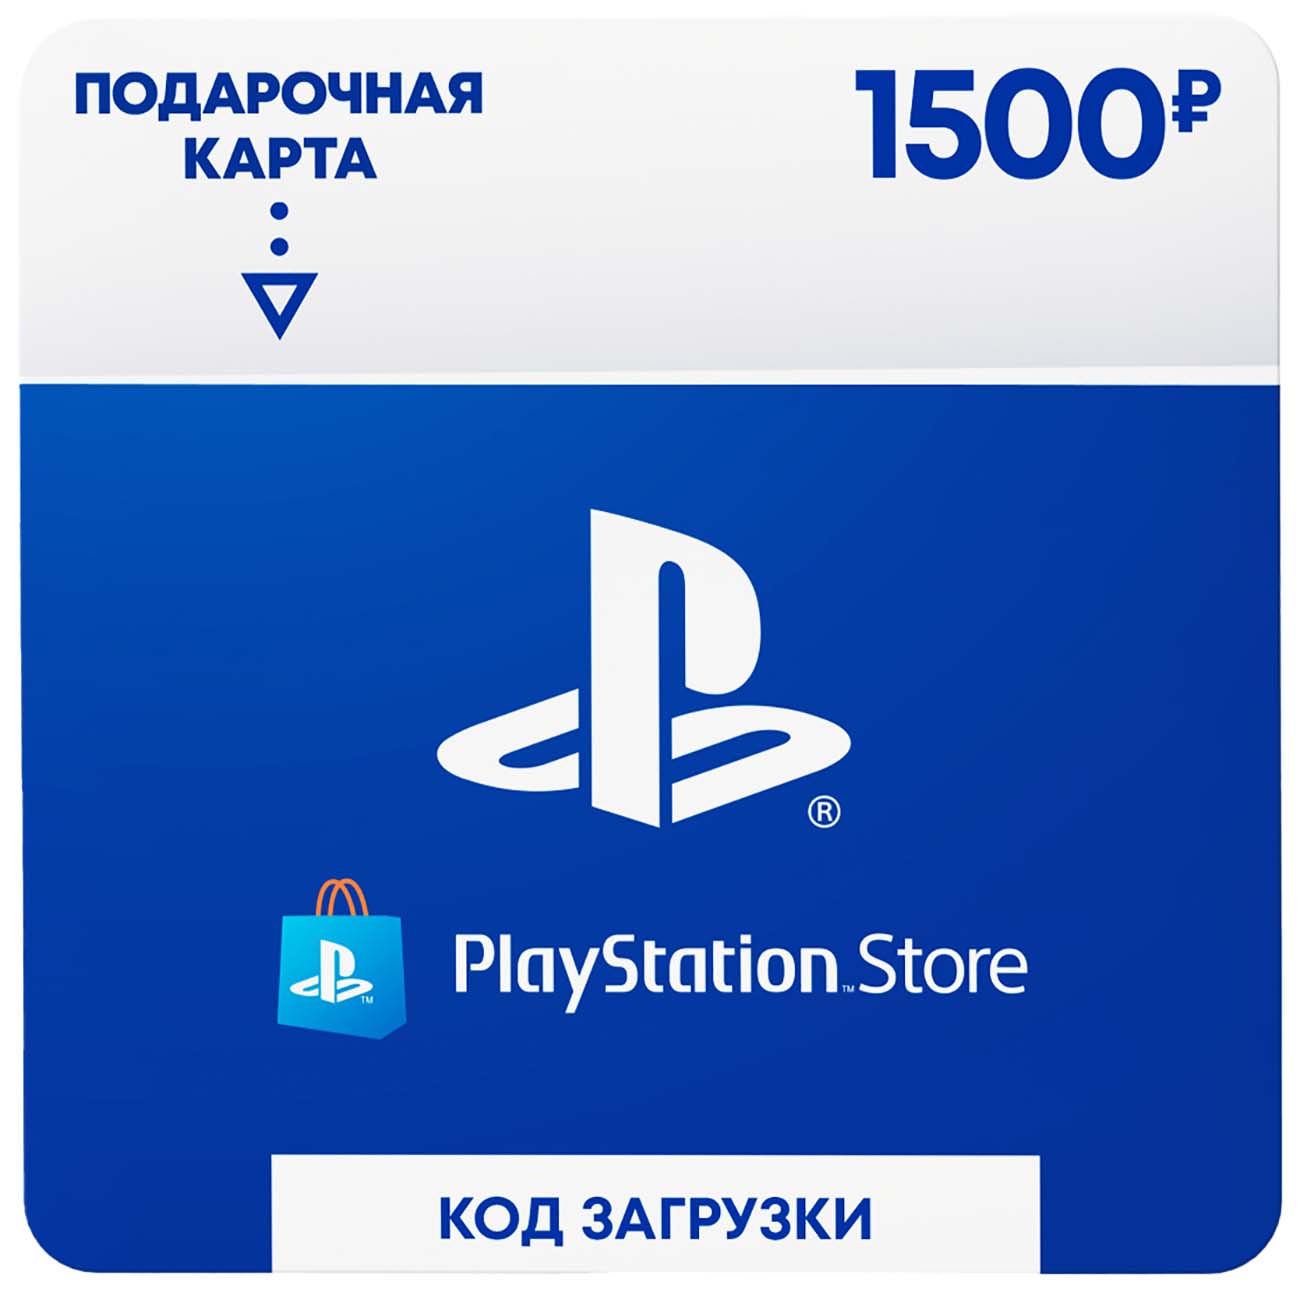 Payment card PSN 1500 rubles PlayStation Network Russia